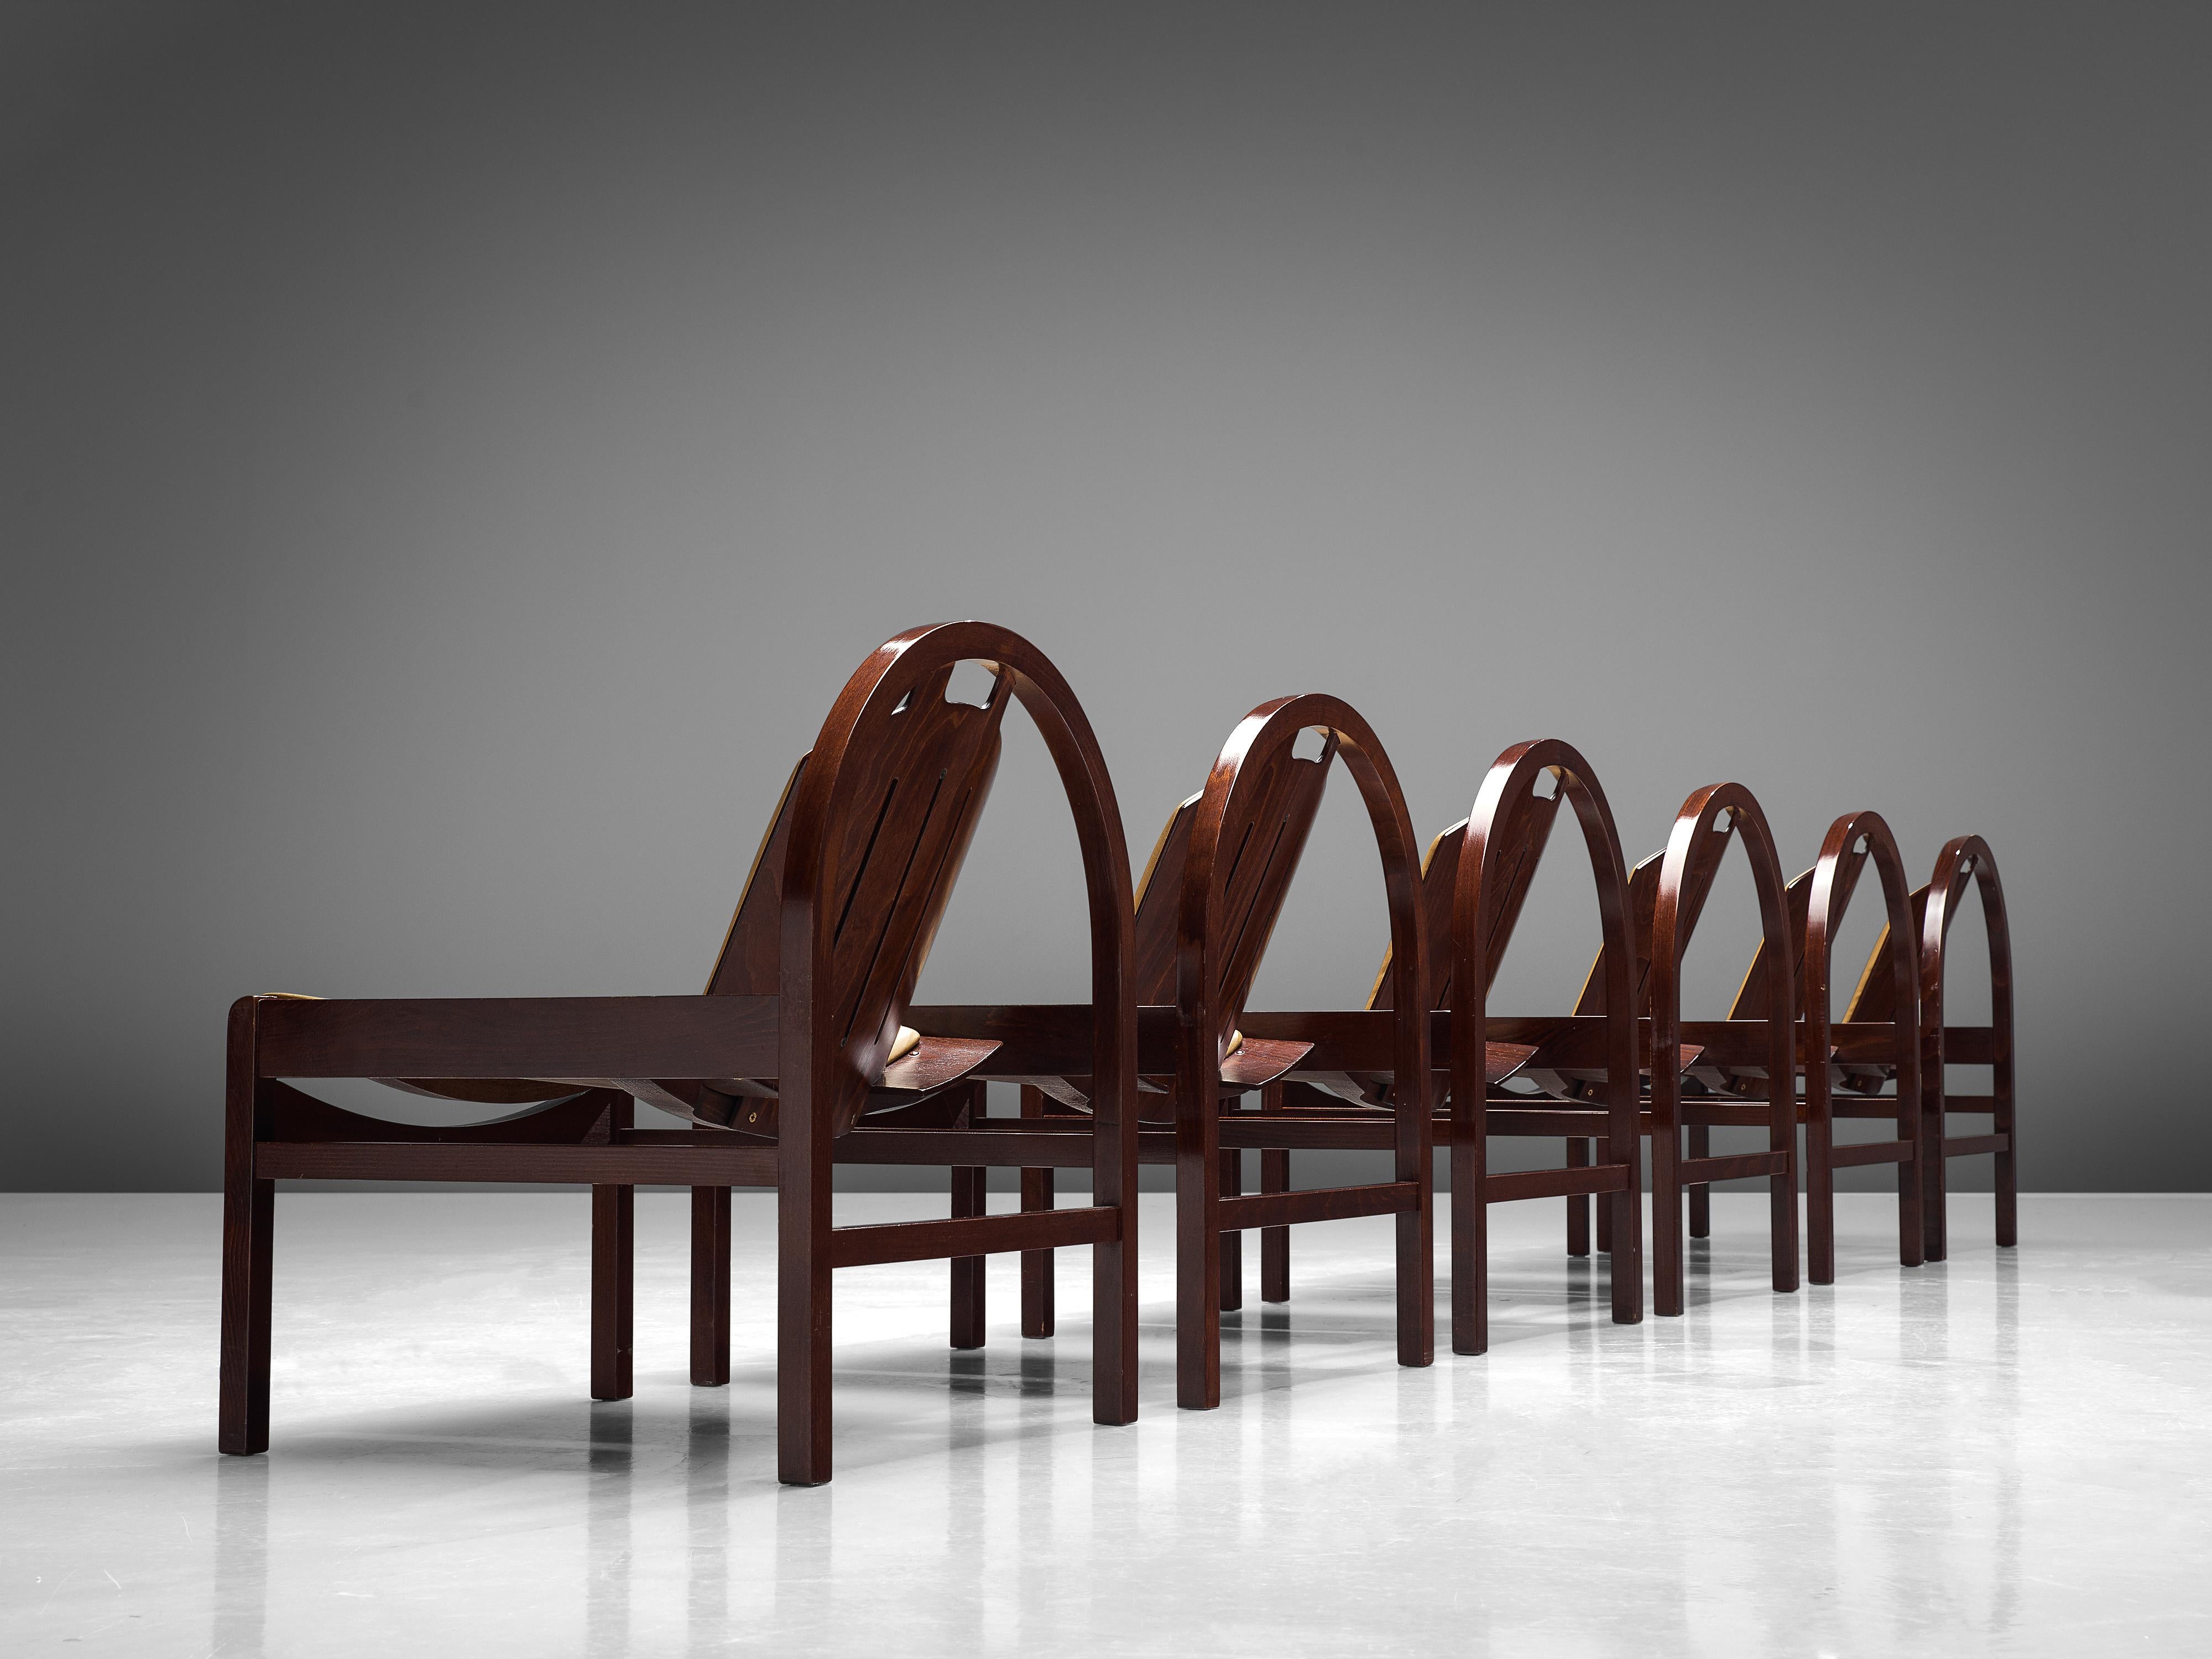 Baumann, 'Argos' easy chairs, stained beech, leather, France, 1970s

These 'Argos' lounge chairs are manufactured by Baumann in France in the 1970s. The chairs feature a round frame that supports the tilted backrest. The seat is wide and low and is